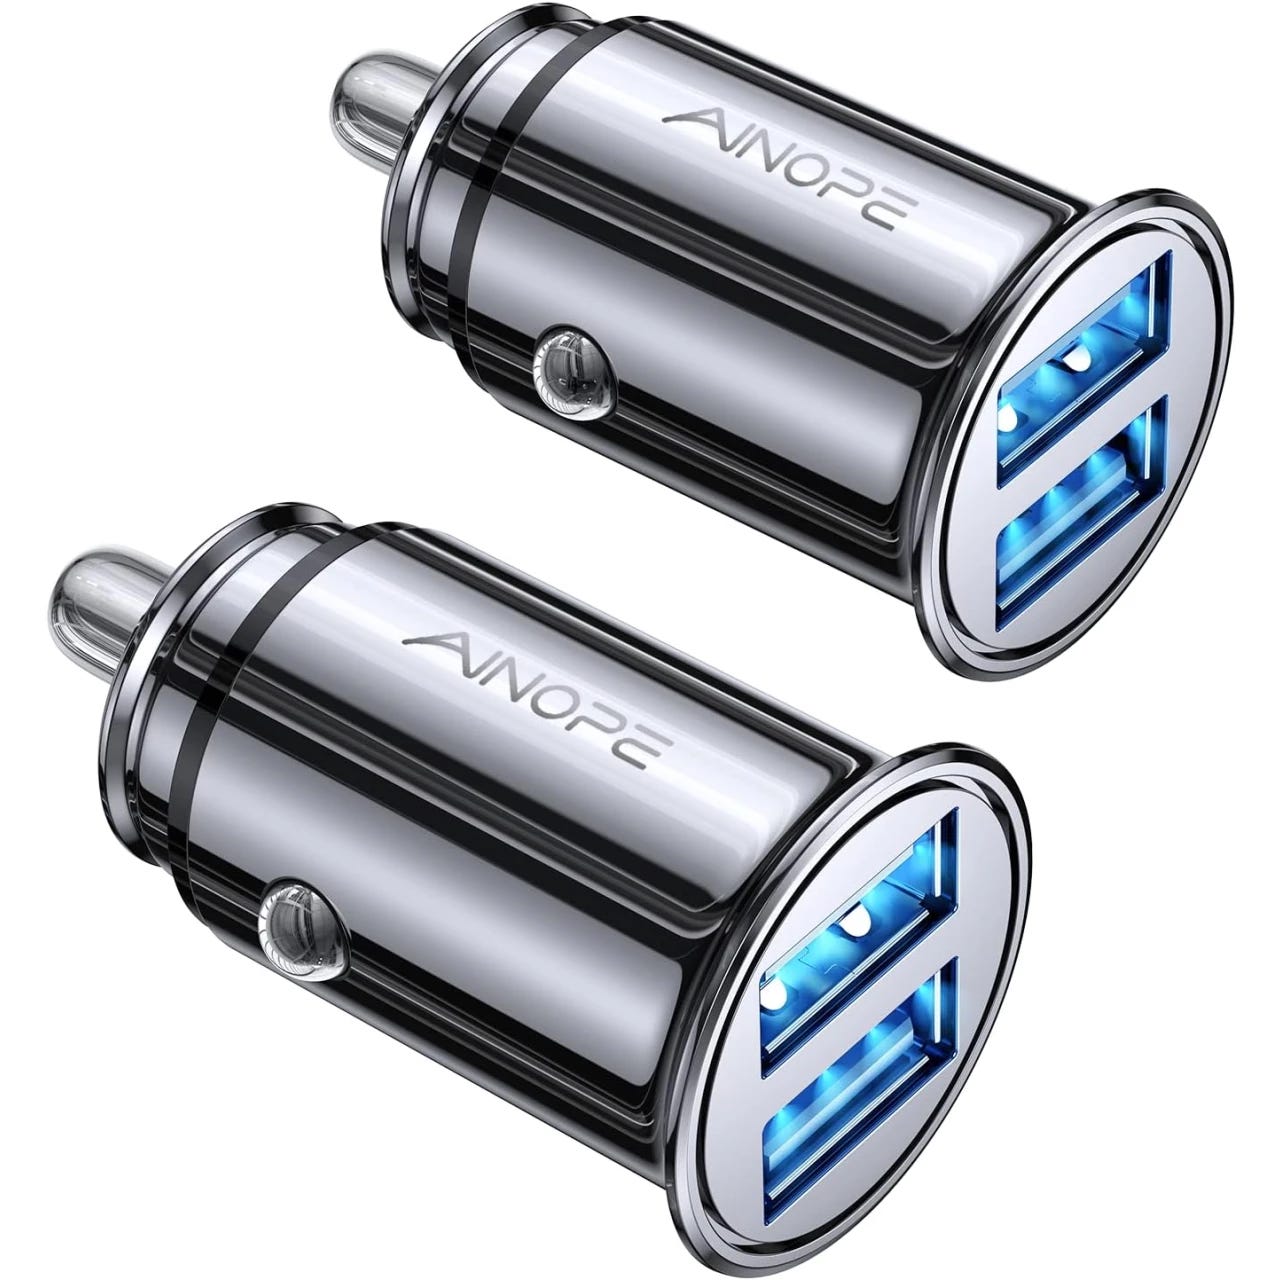 Car Charger,AILKIN 2Pack 3.4A Dual Port USB Car Charger Adaptor